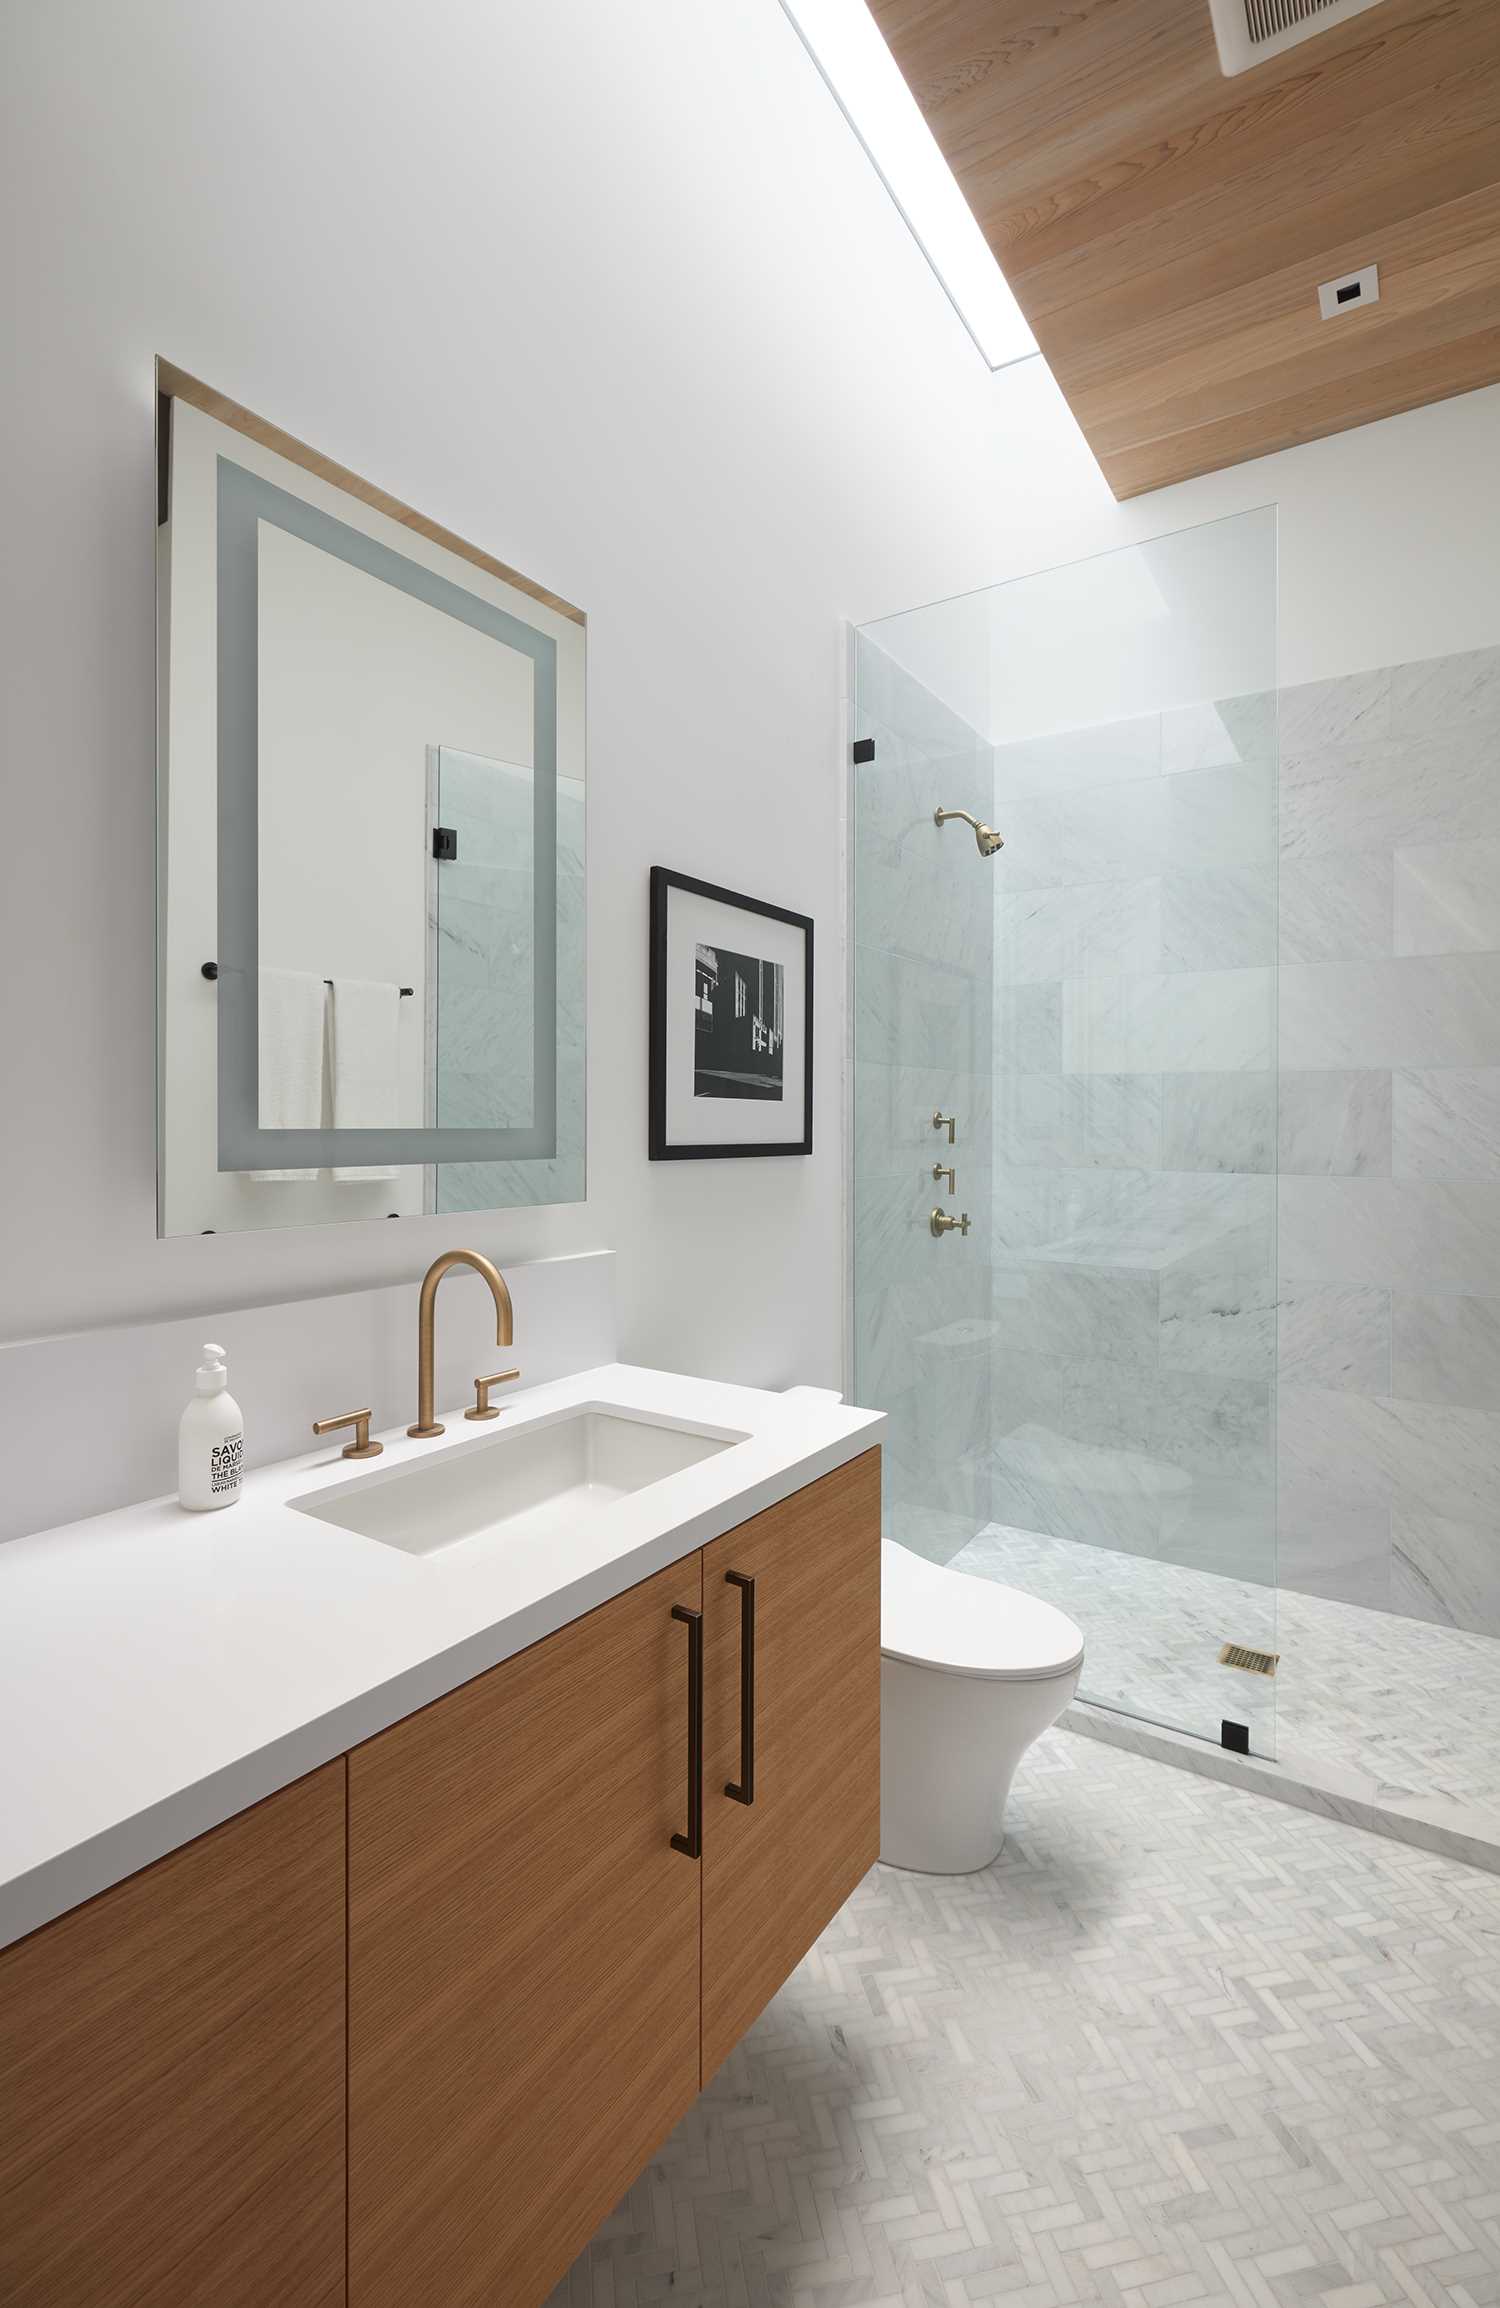 A modern bathroom with wood accents, light colored tiles, and a skylight.